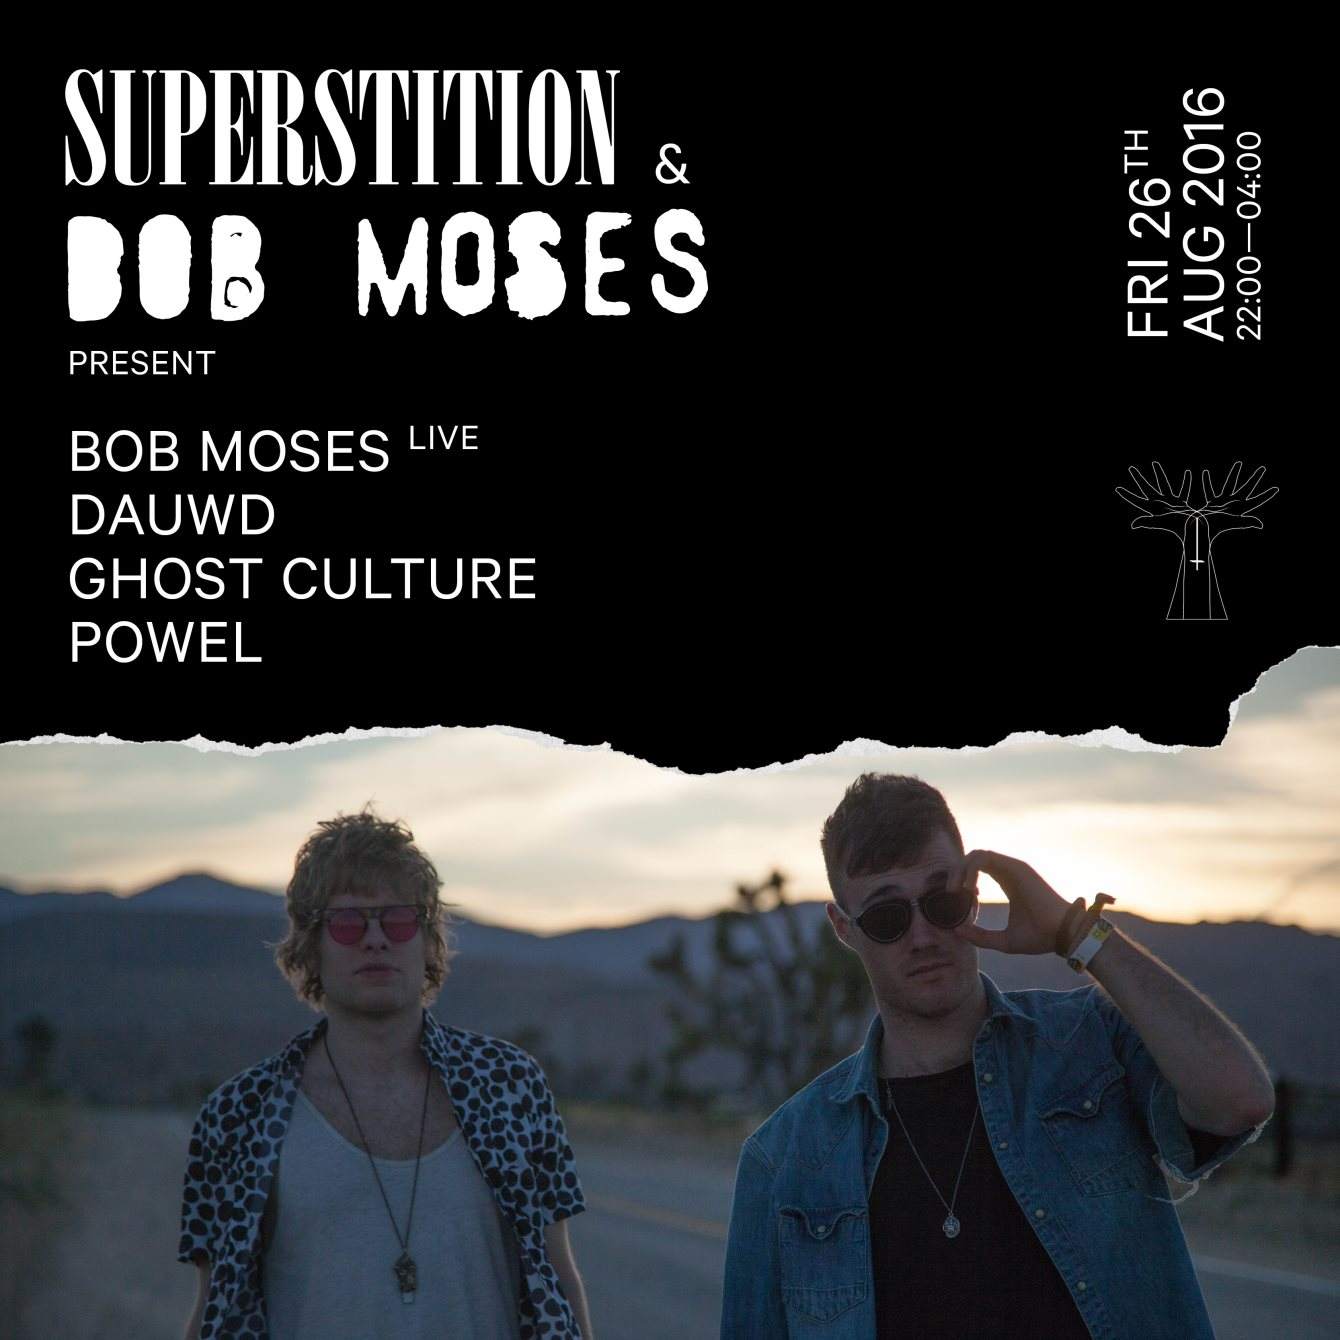 Superstition & Bob Moses presents Never Enough Launch Party - Página frontal